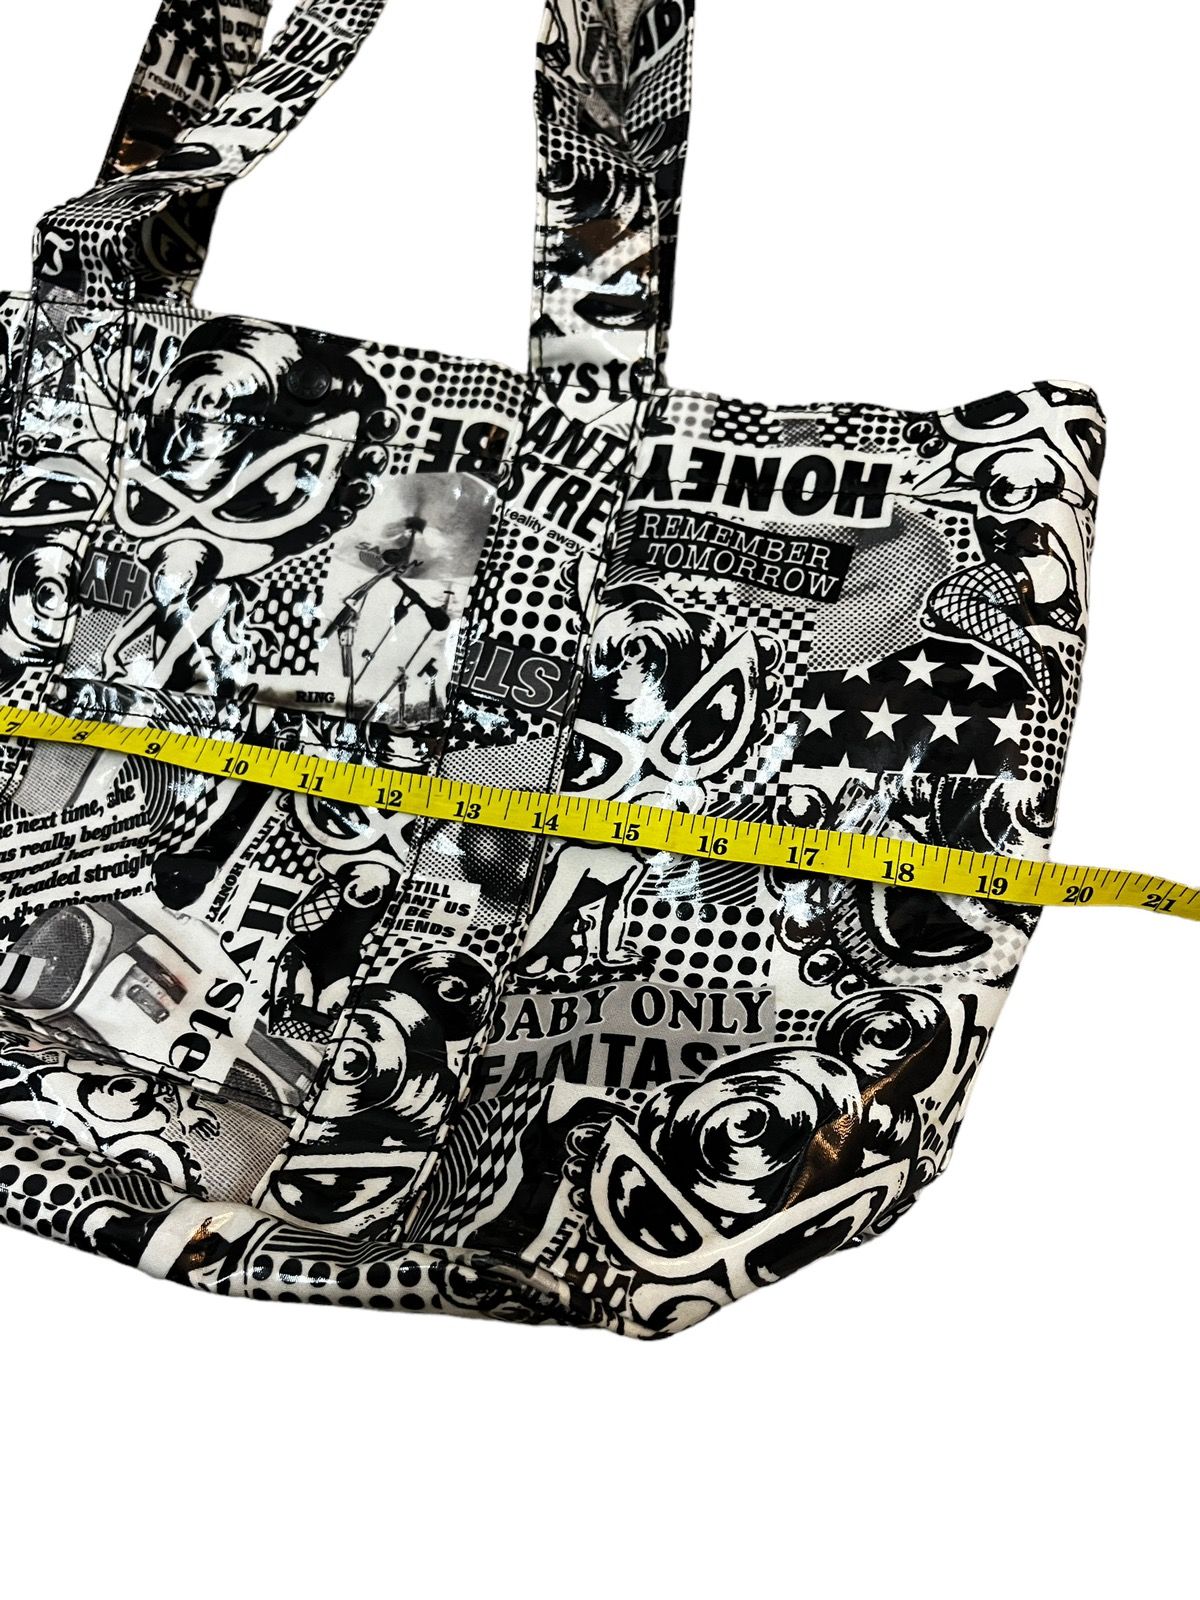 Hysteric Glamour Monochrome Bag - 8